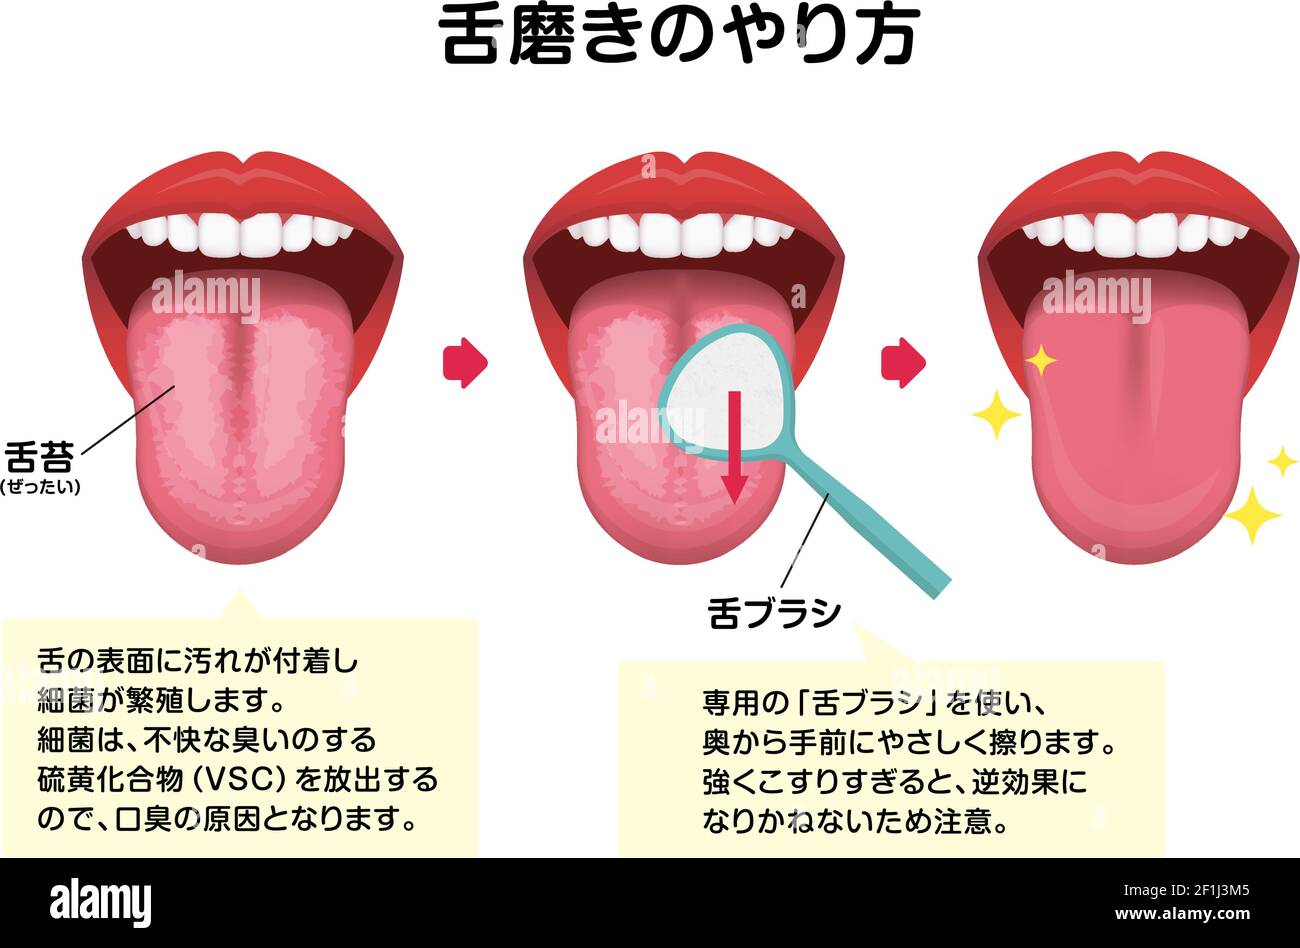 How to clean your tongue vector illustration (Halitosis prevention ...